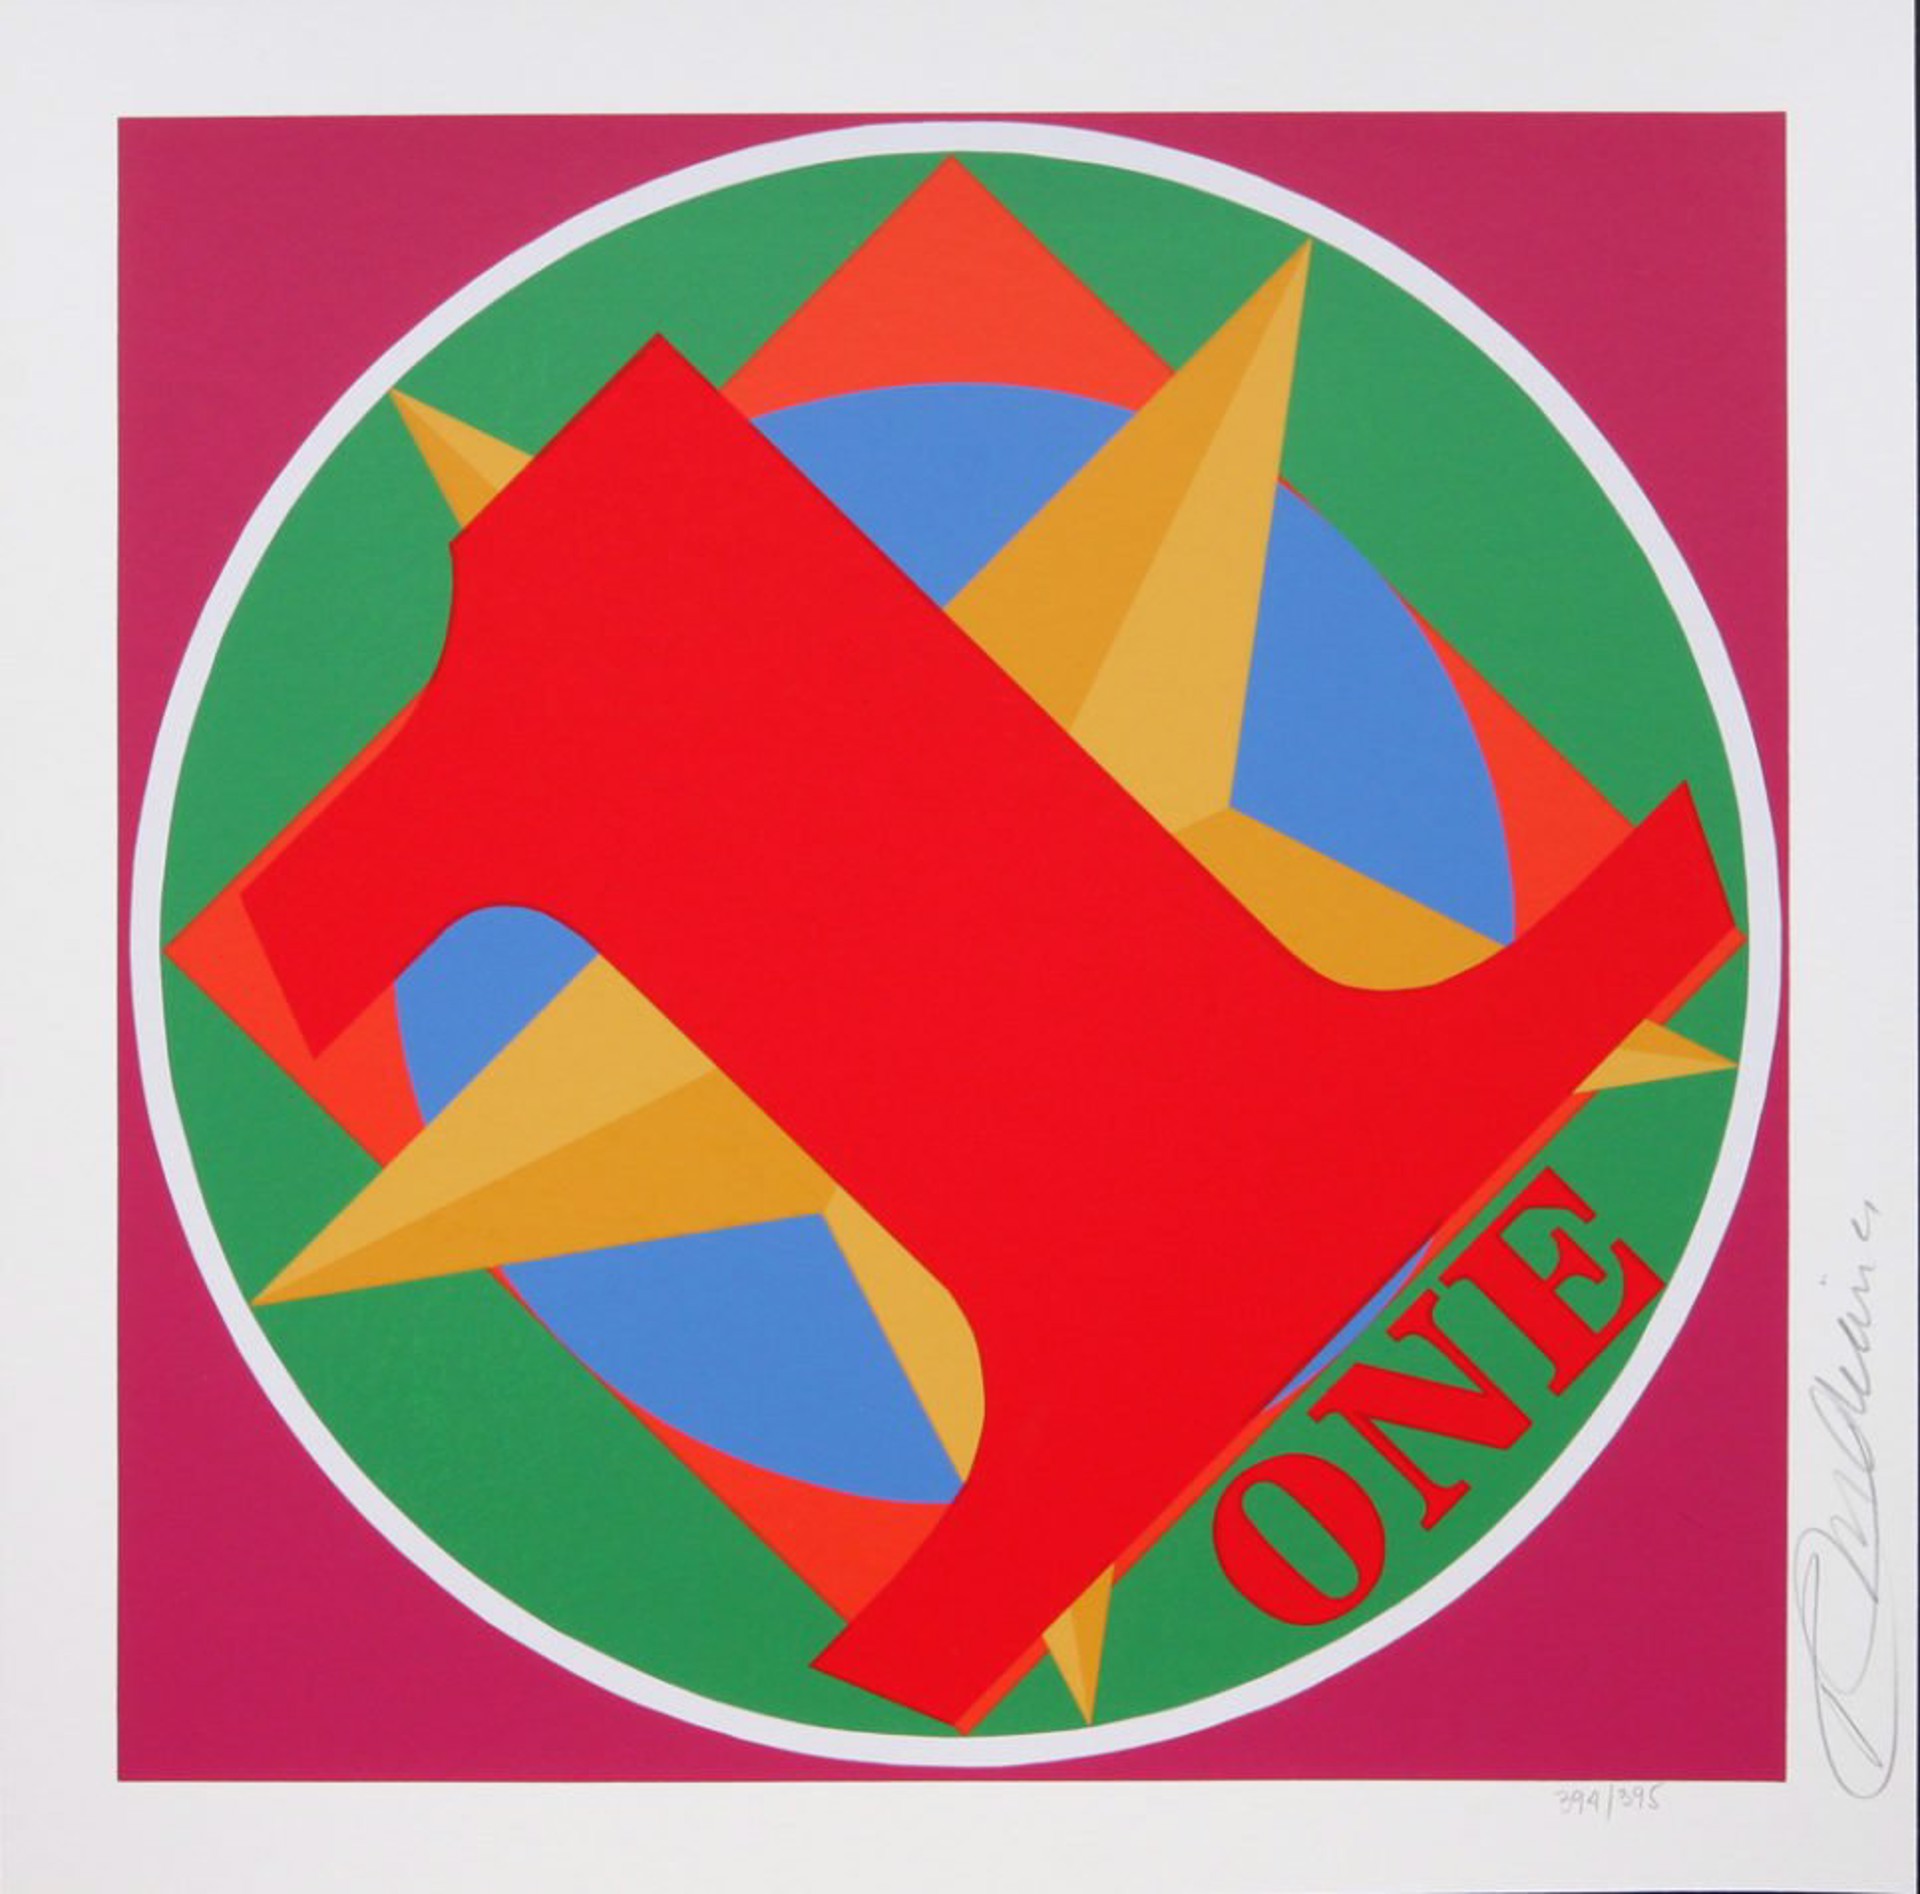 The American Dream Portfolio: One Indiana Square by Robert Indiana